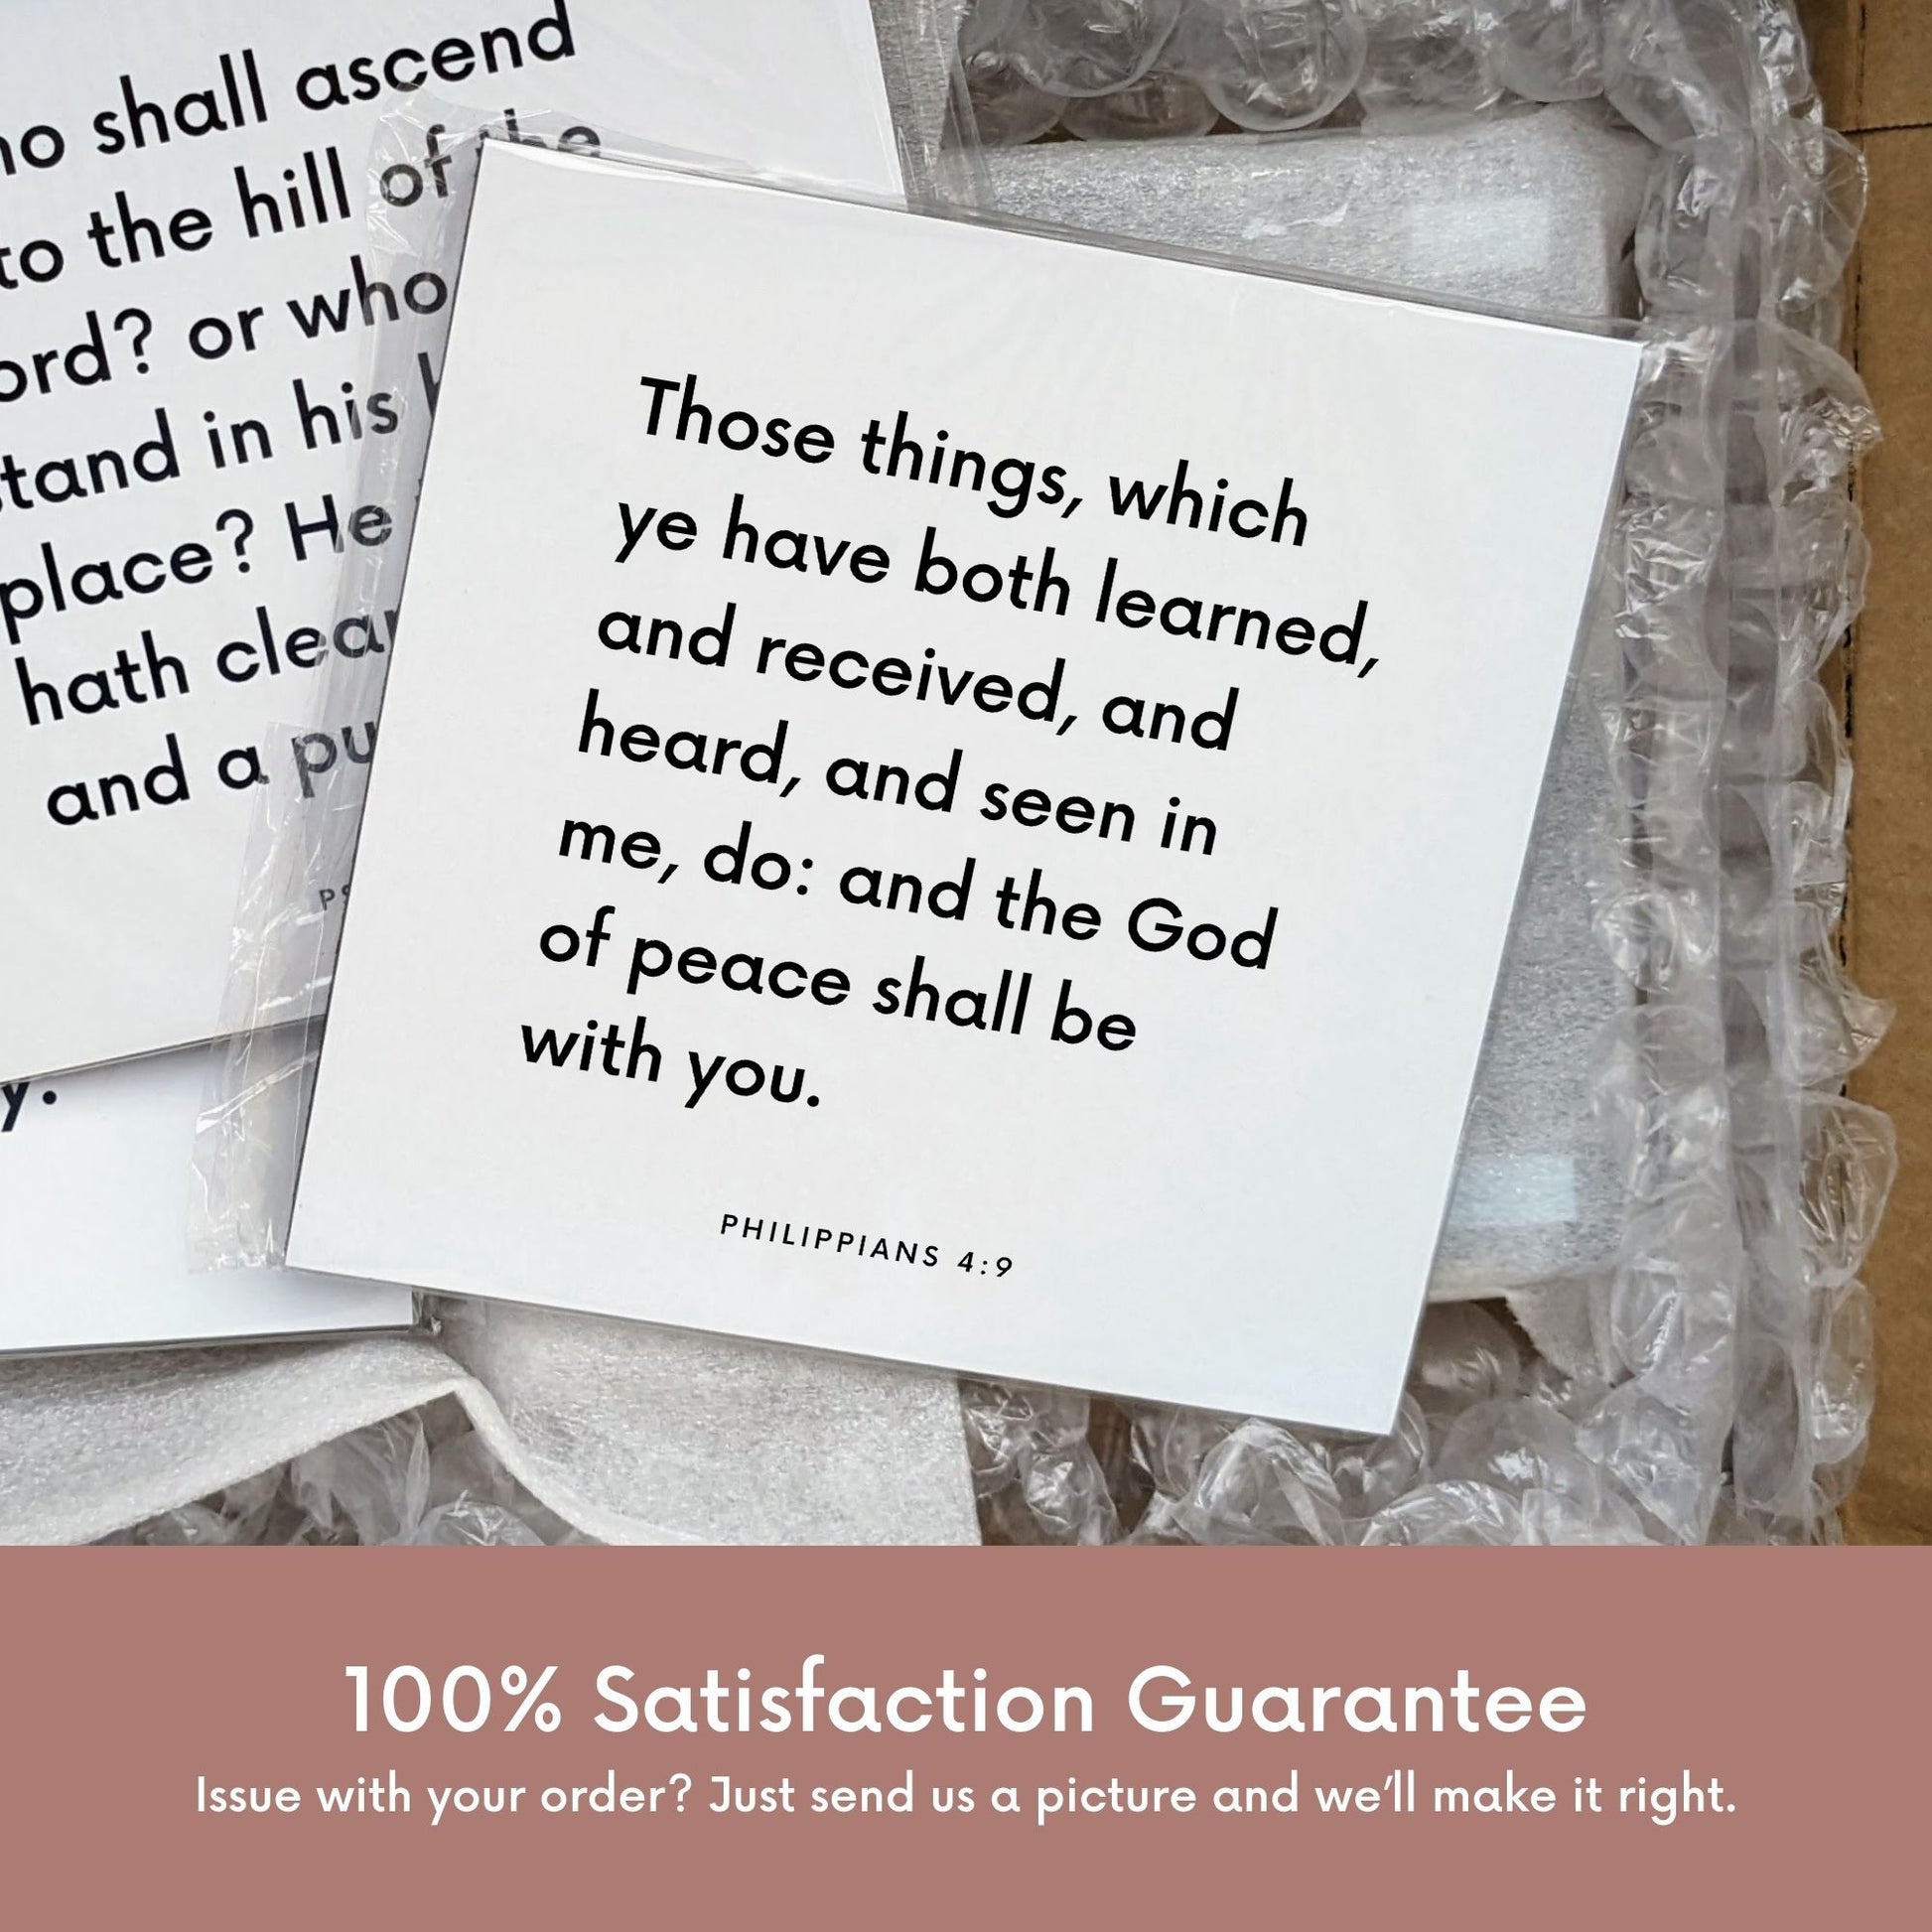 Shipping materials for scripture tile of Philippians 4:9 - "Those things which ye have seen in me, do"